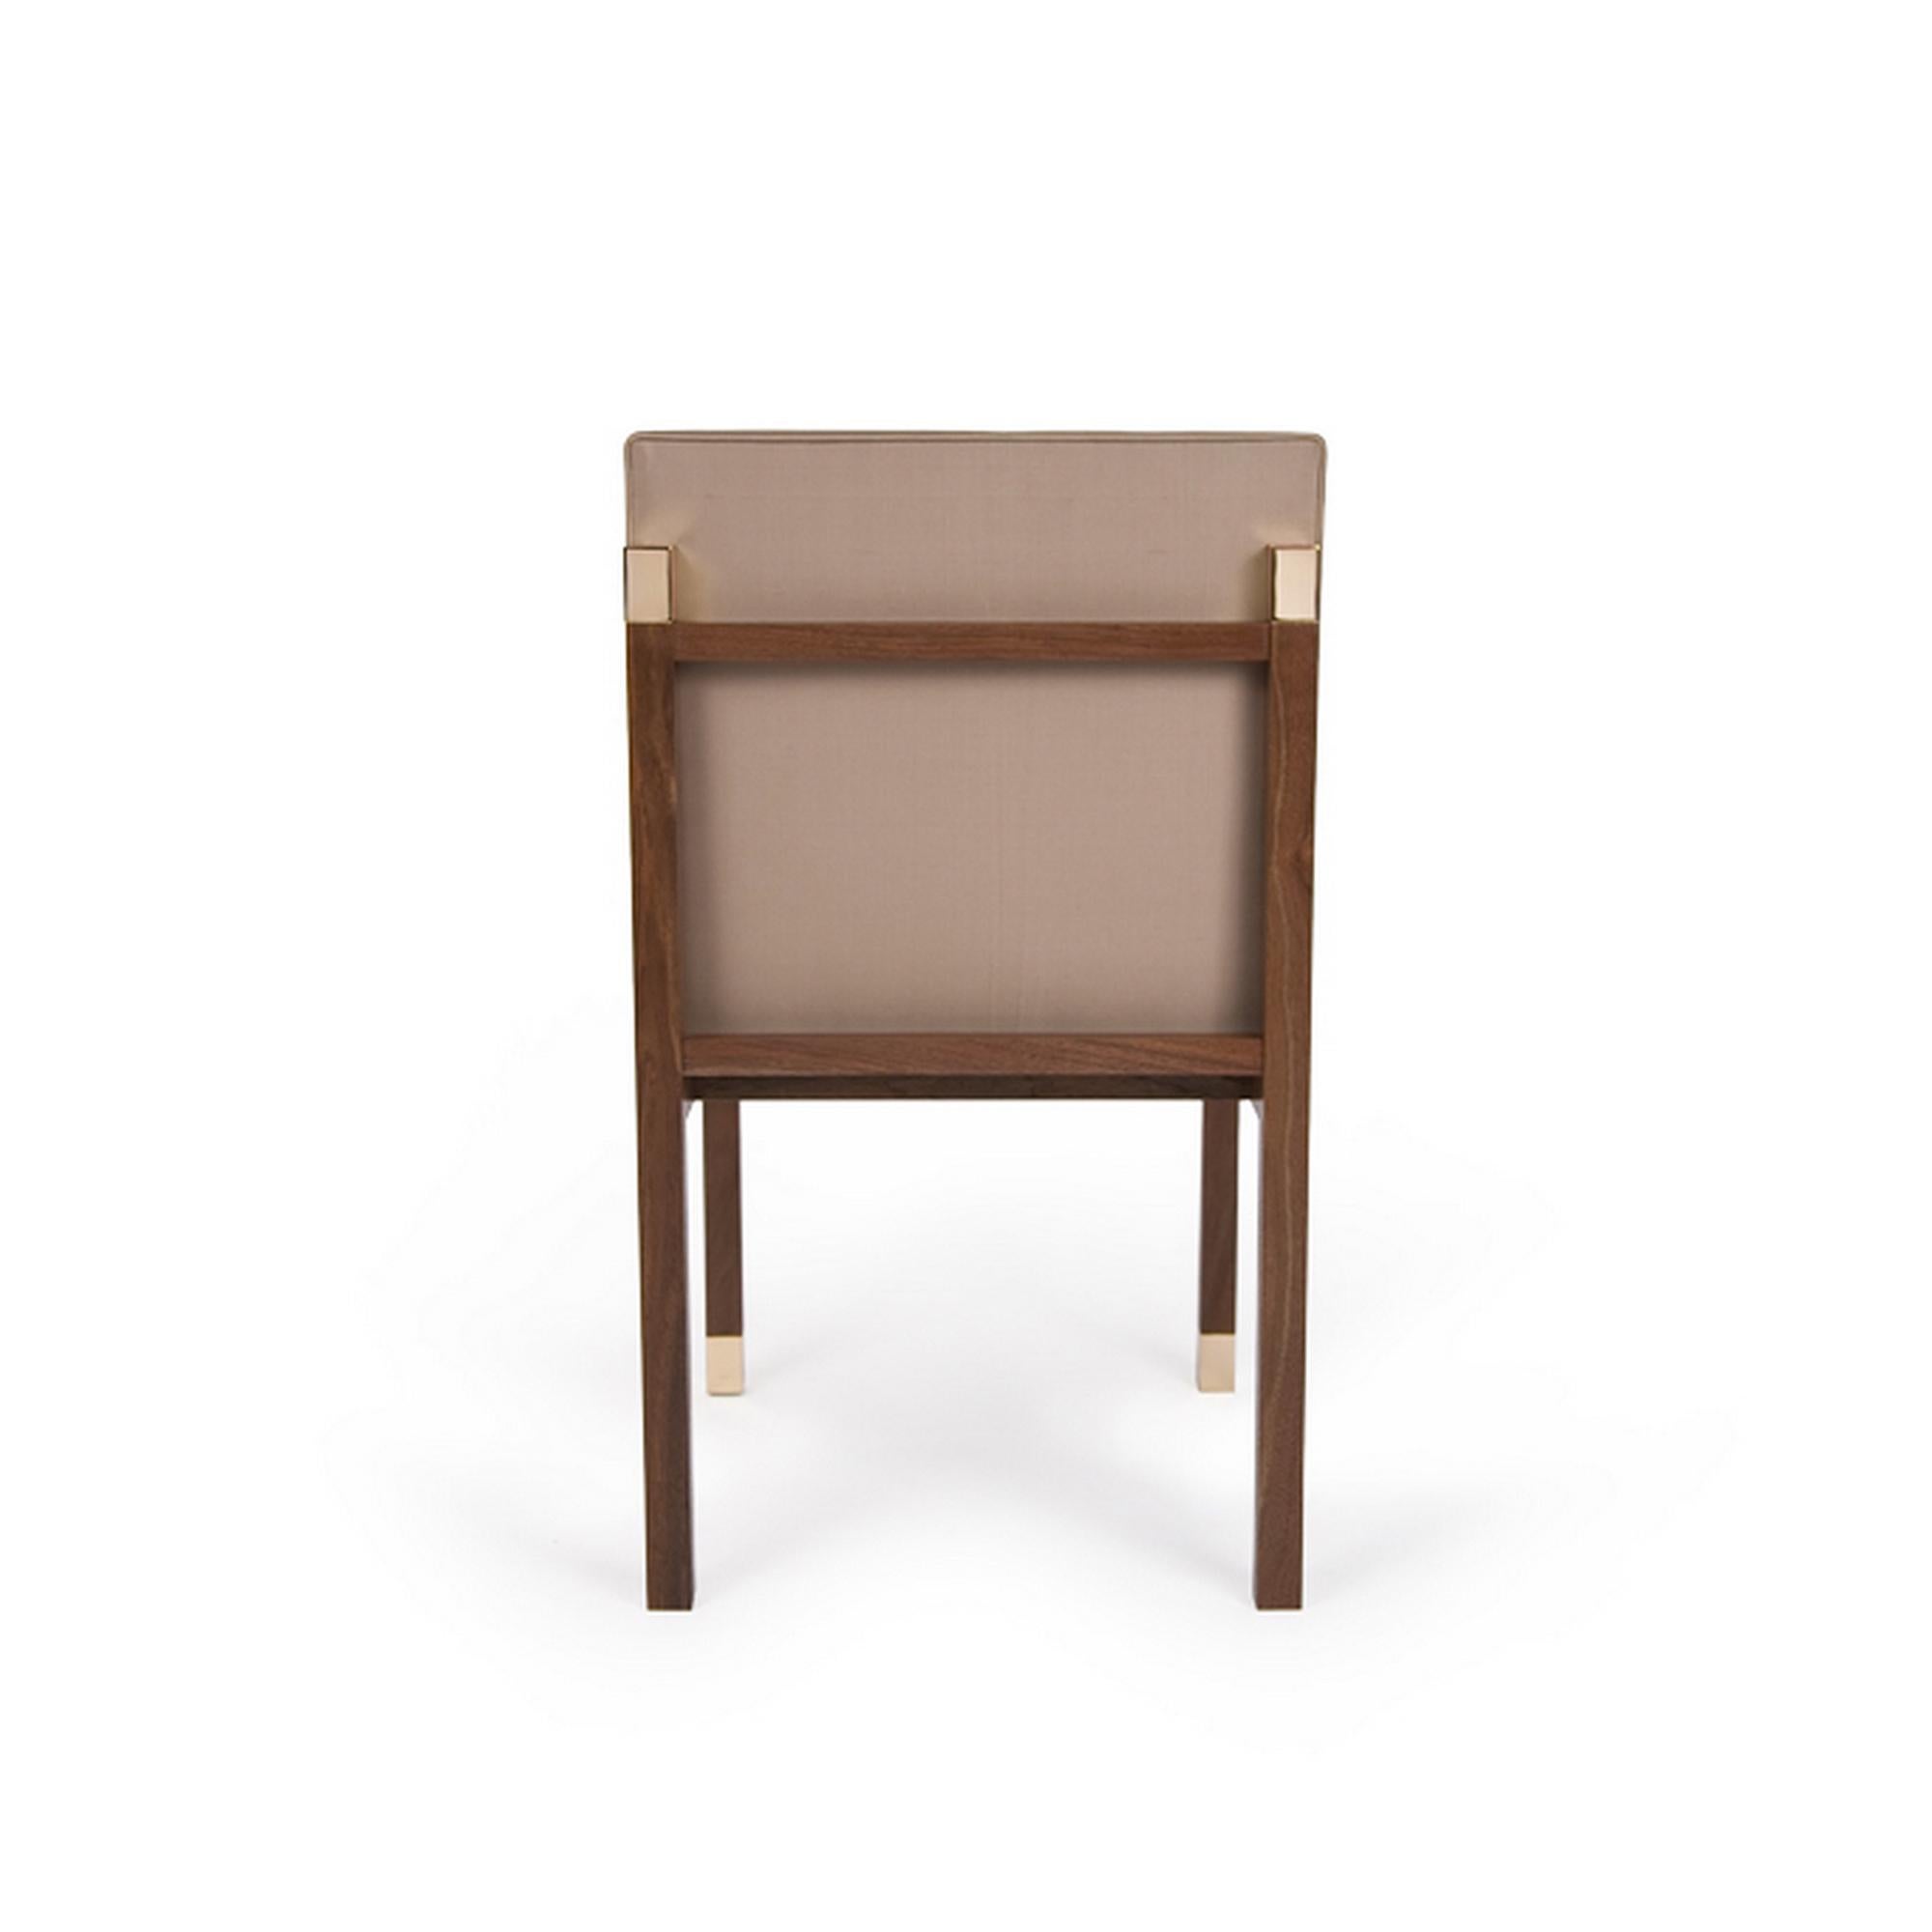 The Colt Chair pictured here consists of an organic walnut base, bronze caps, and finished with a beige fabric. The similarities in the beige and brown create a synergy for the colt chairs. Please do note that the fabrics are C.O.M.